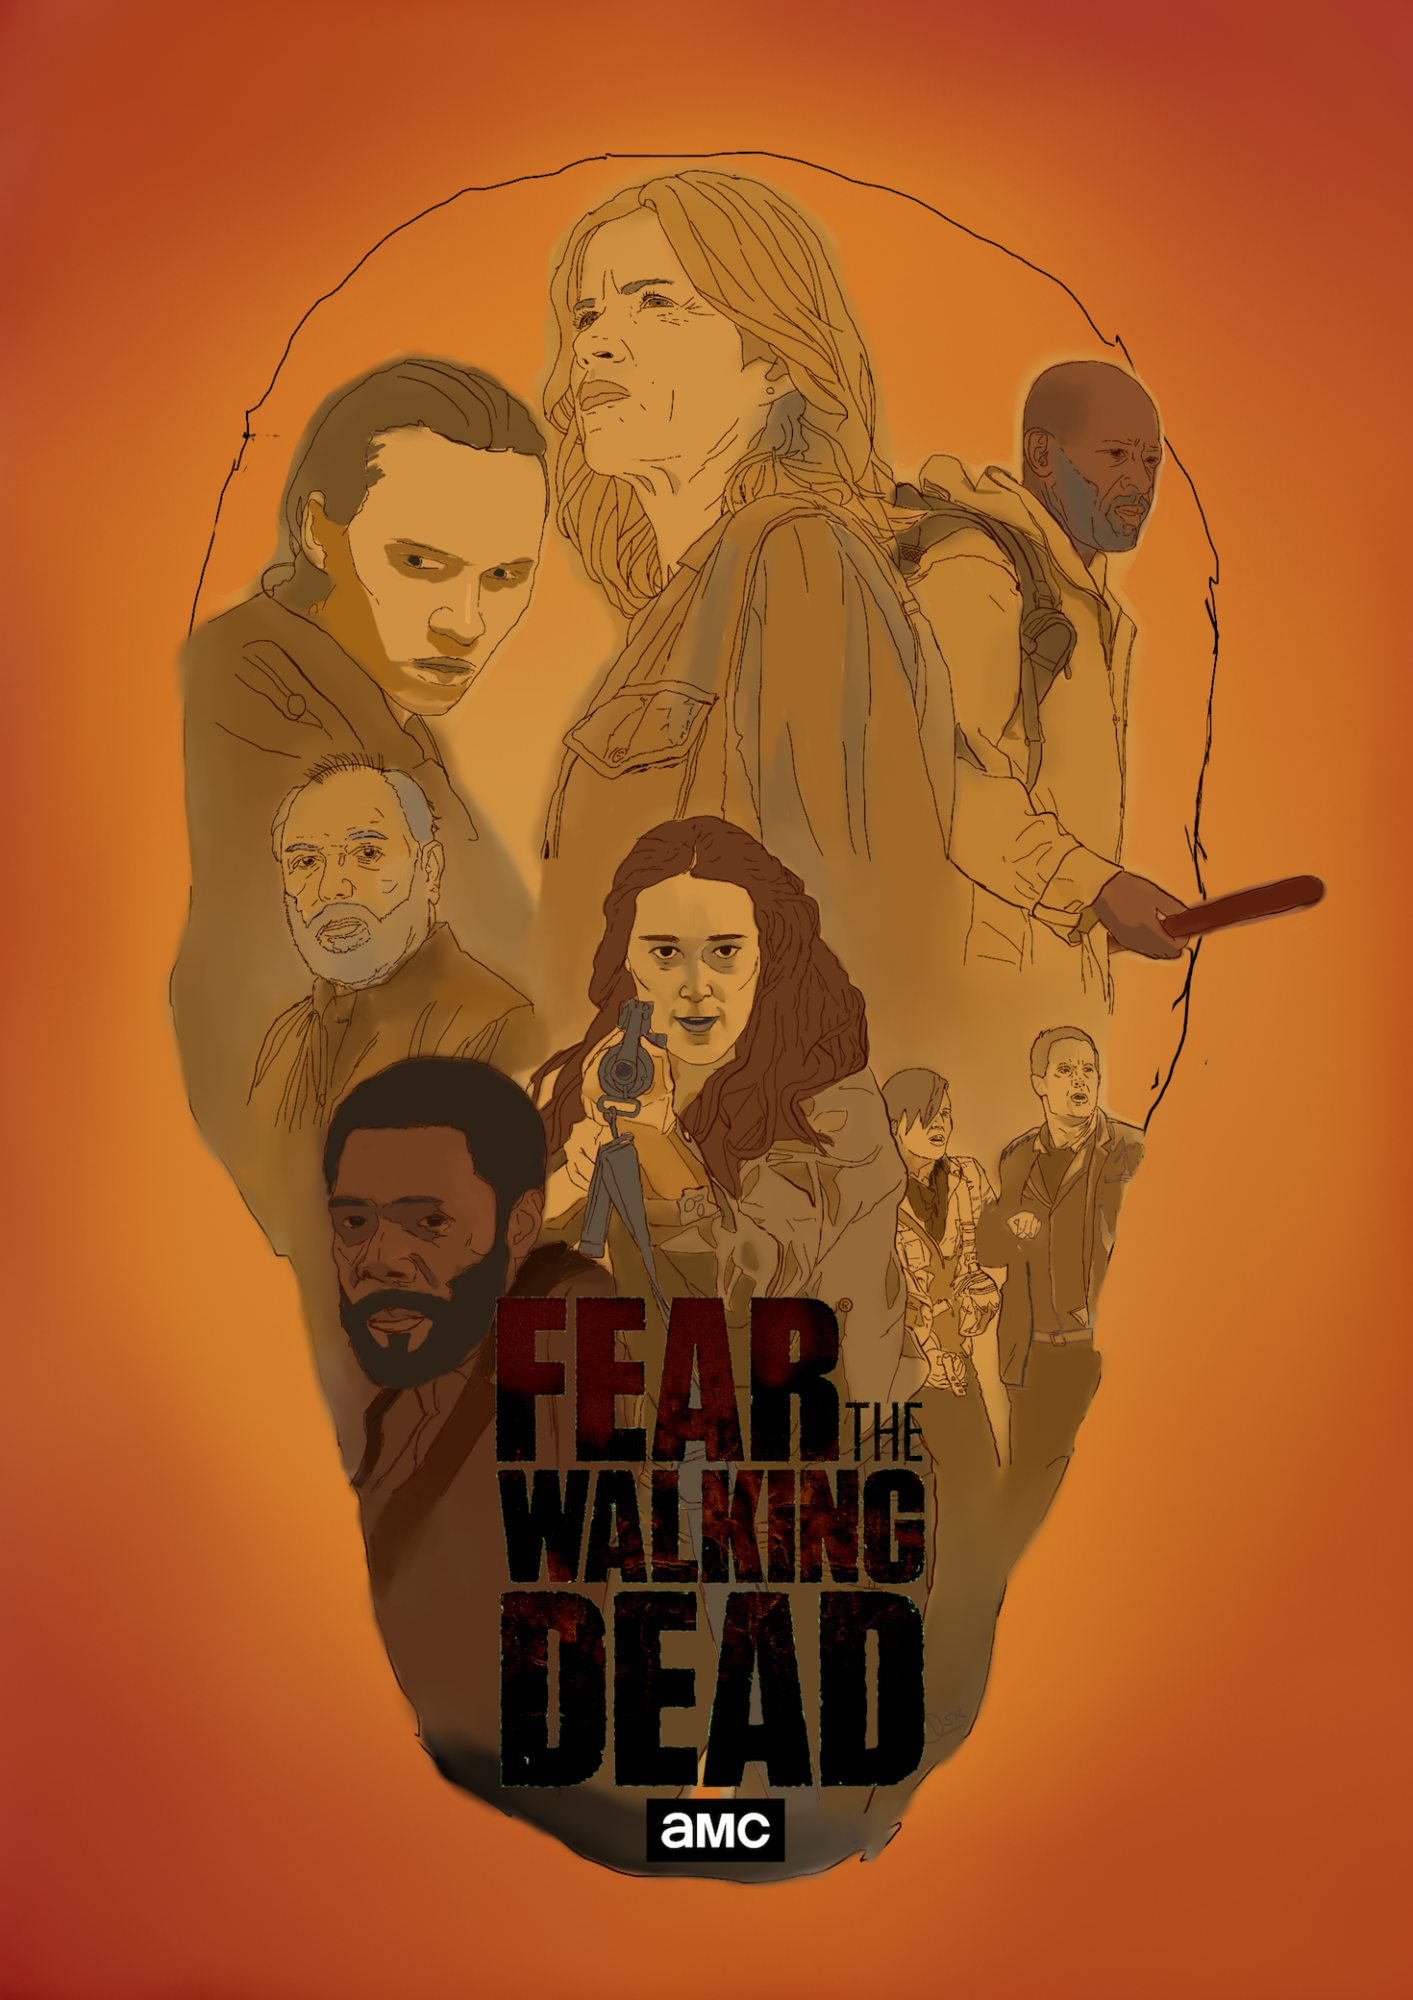 FEAR A NEW WORLD | Qsk | PosterSpy